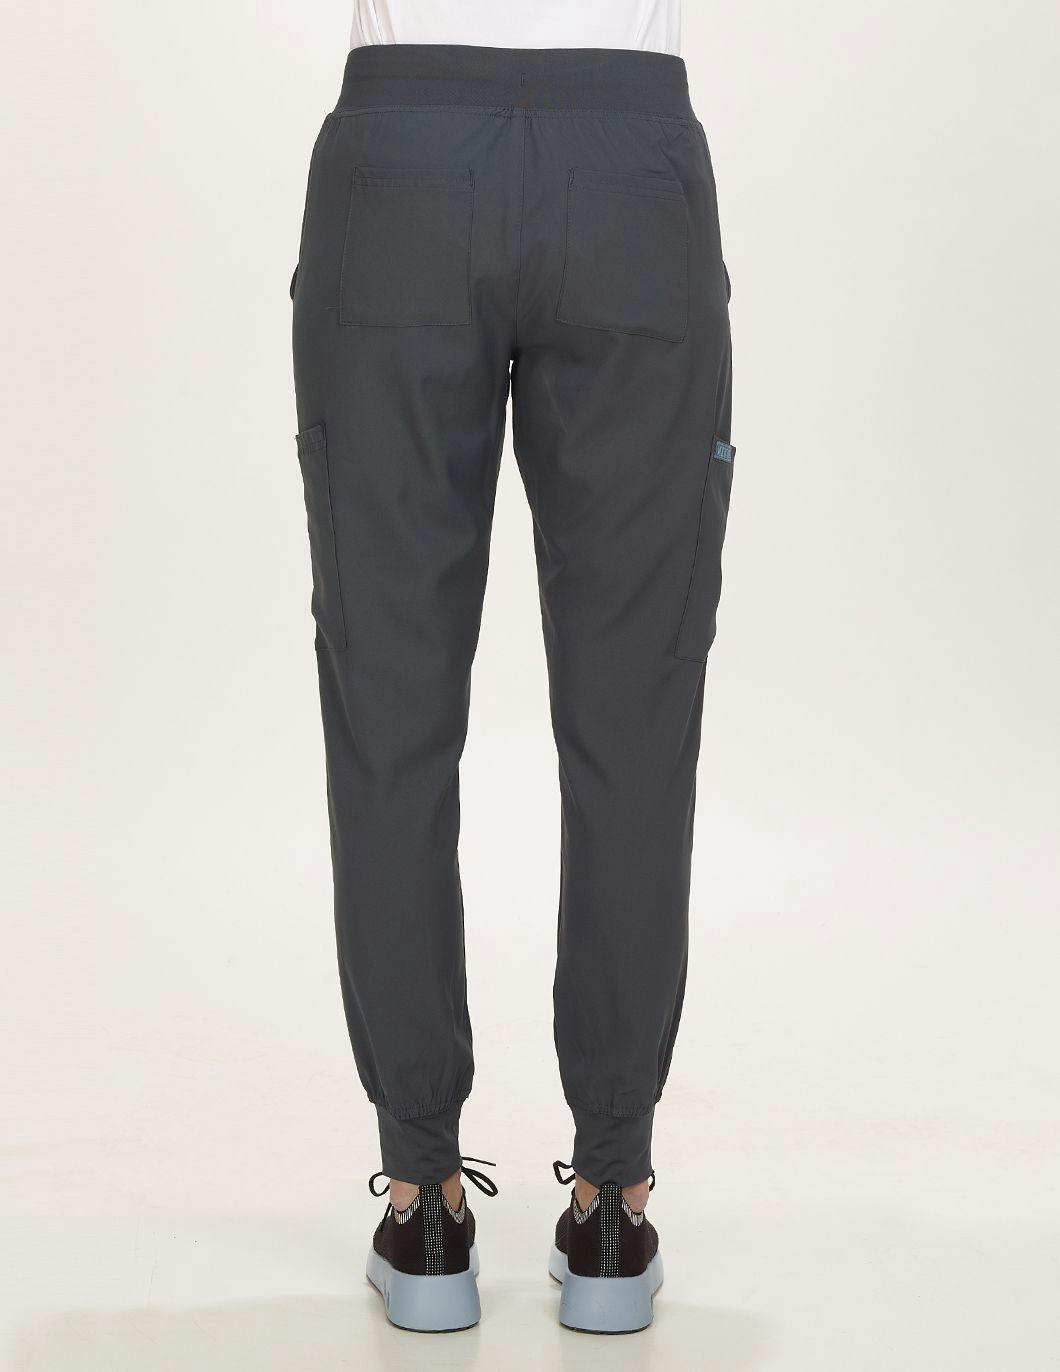 Med Couture Insight Jogger Scrub Pant